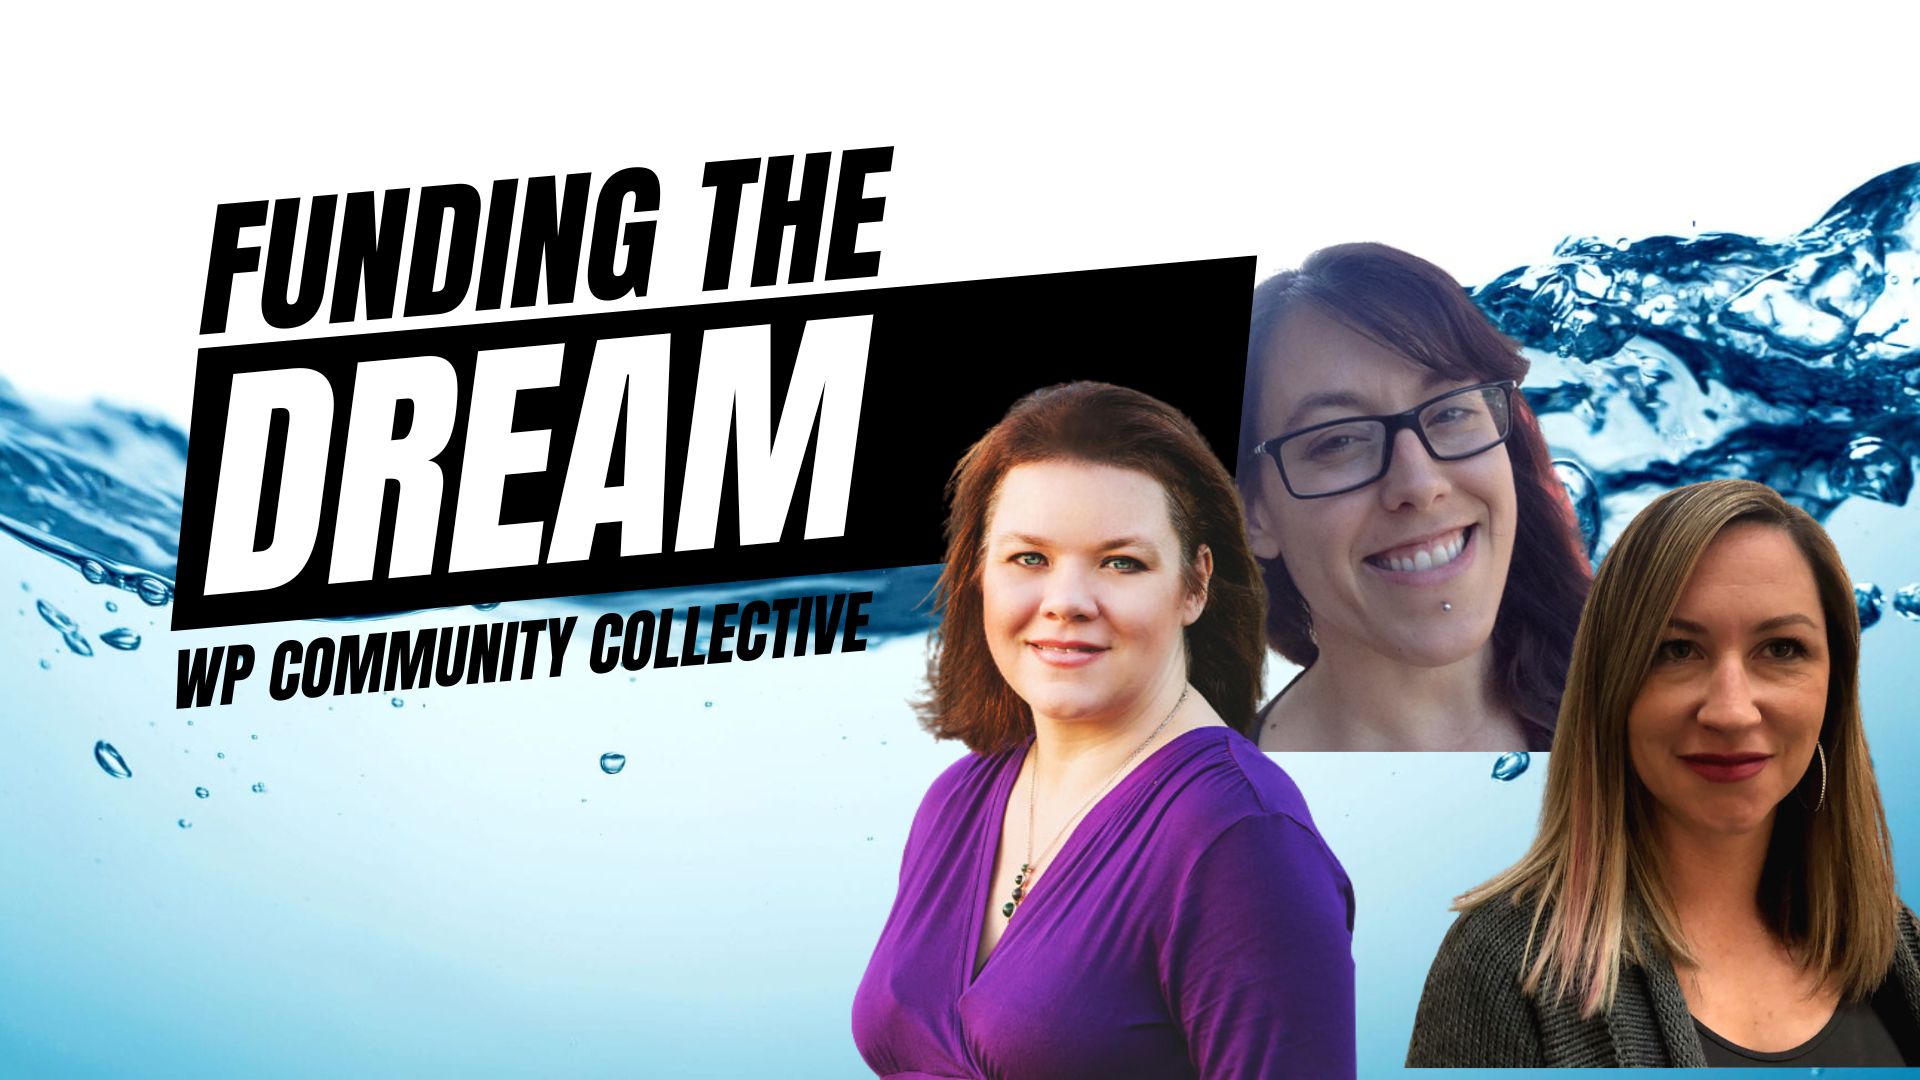 EP437 - Funding the Dream with the WP Community Collective